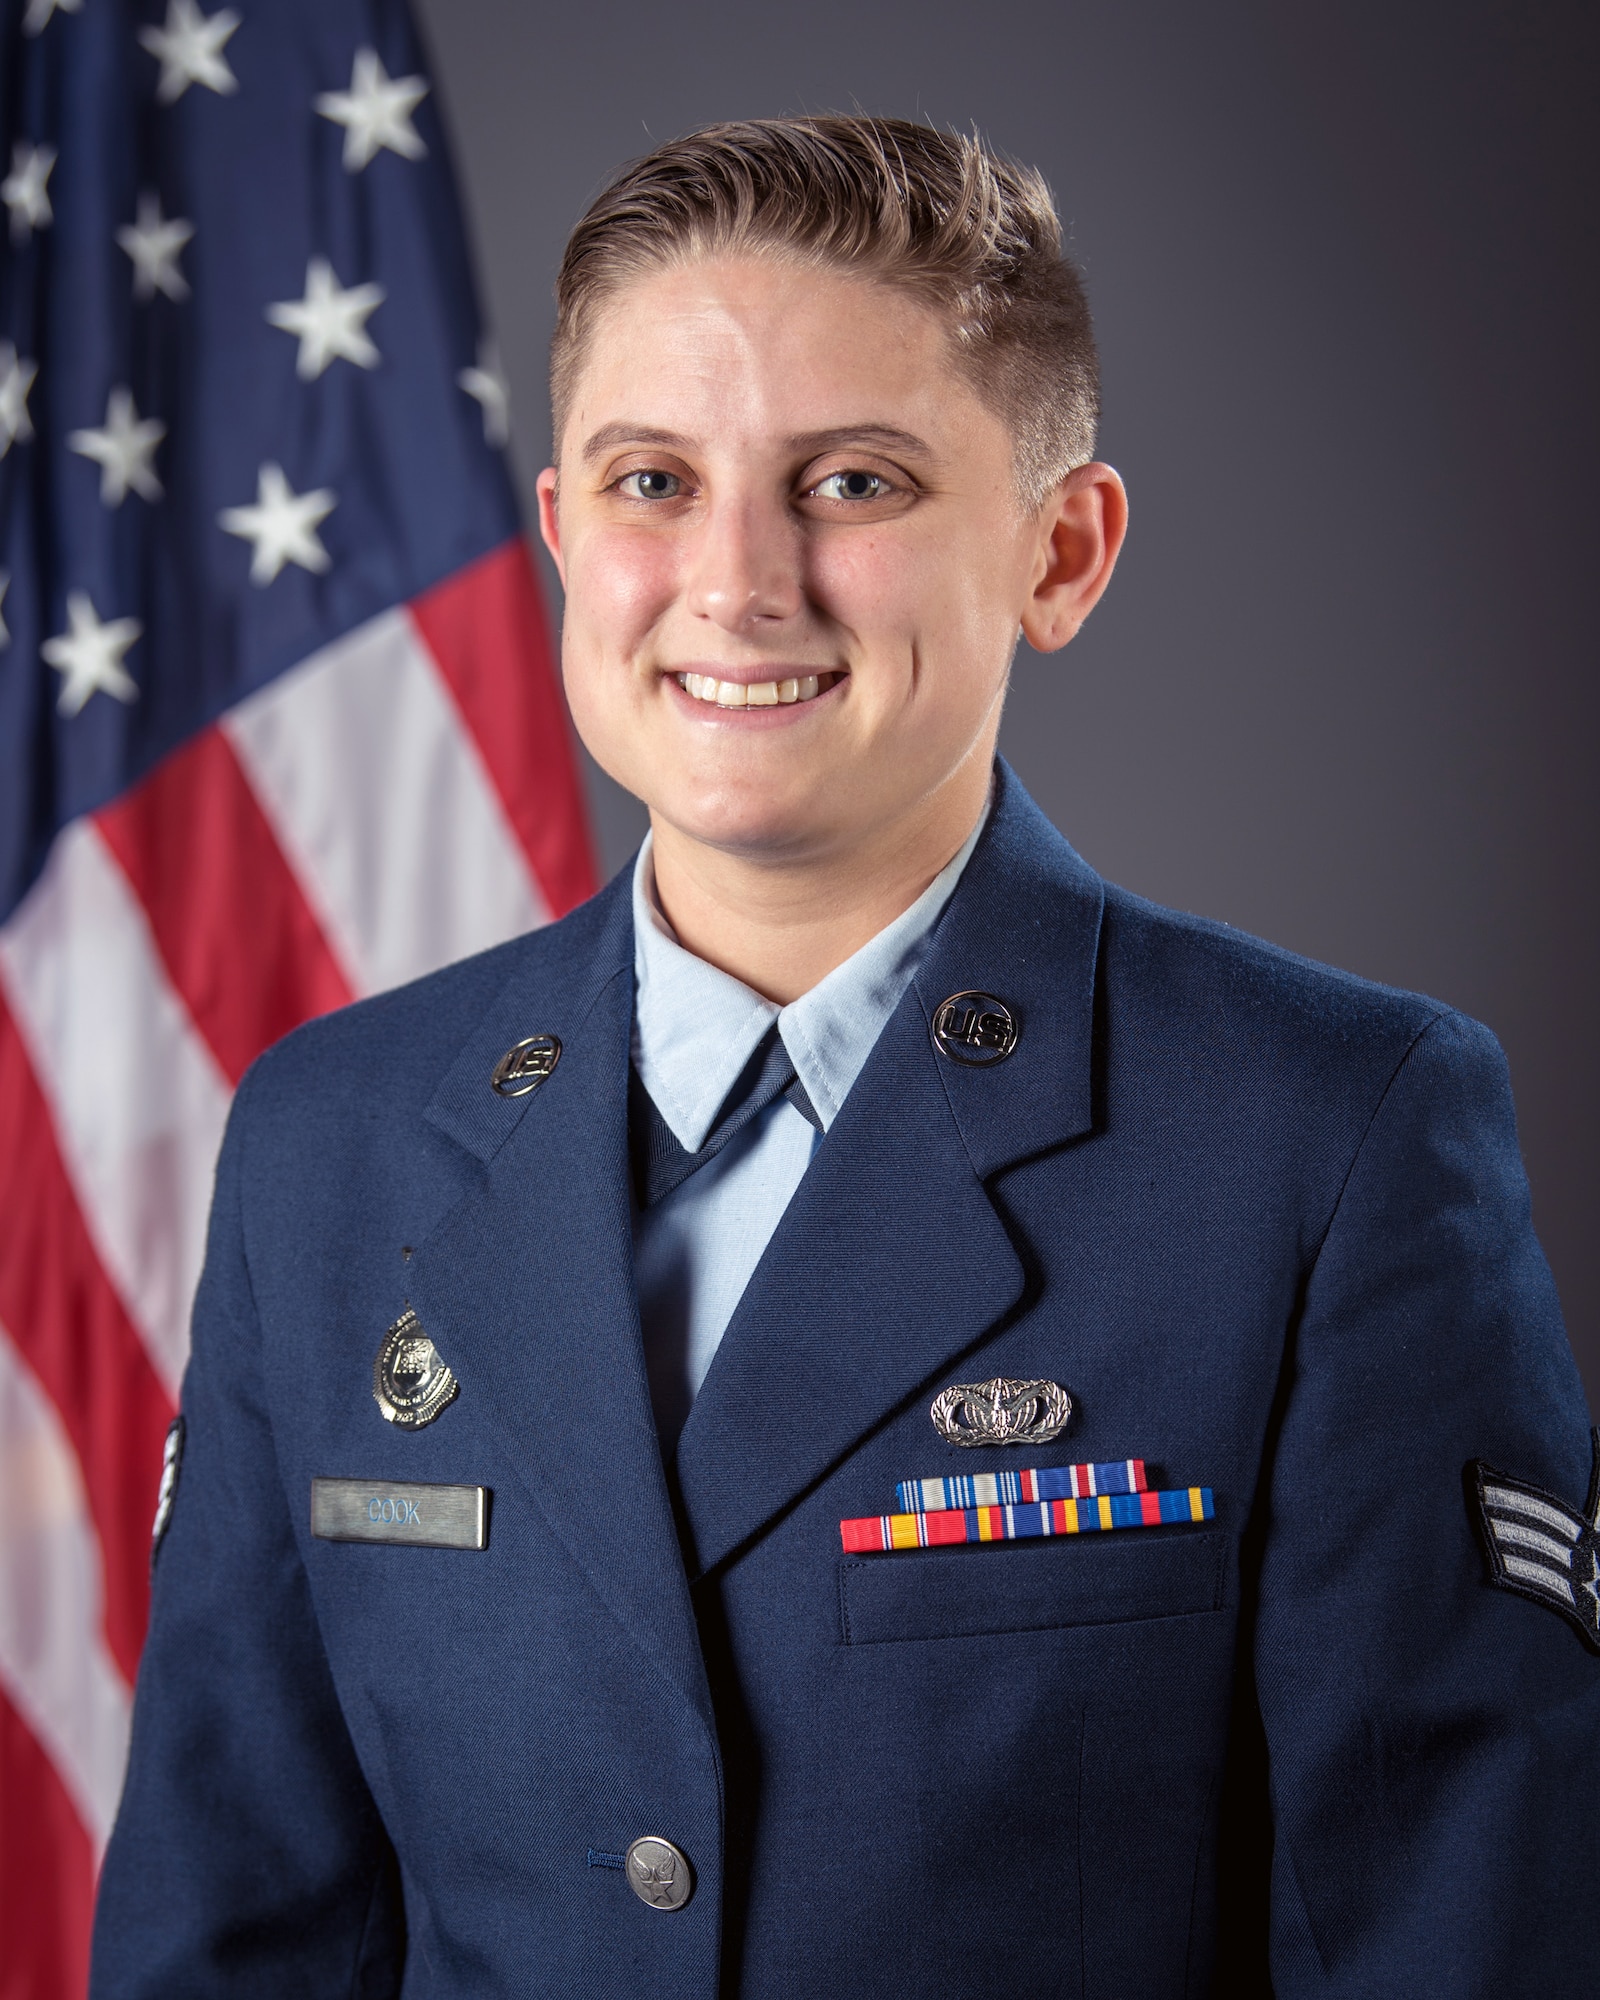 Senior Airman Brianna Cook is the Kentucky Air National Guard's 2019 Airman of the Year in the Airman category. During a deployment to Southwest Asia last year in support of Operation Inherent Resolve, Cook was part of a security team responsible for protecting 67 aircraft and $10 billion in assets. She was hand-picked to operate a Tactical Automated Security System at the largest base in theater, earning an “excellent” rating for performance. (U.S. Air National Guard photo by Master Sgt. Philip Speck)